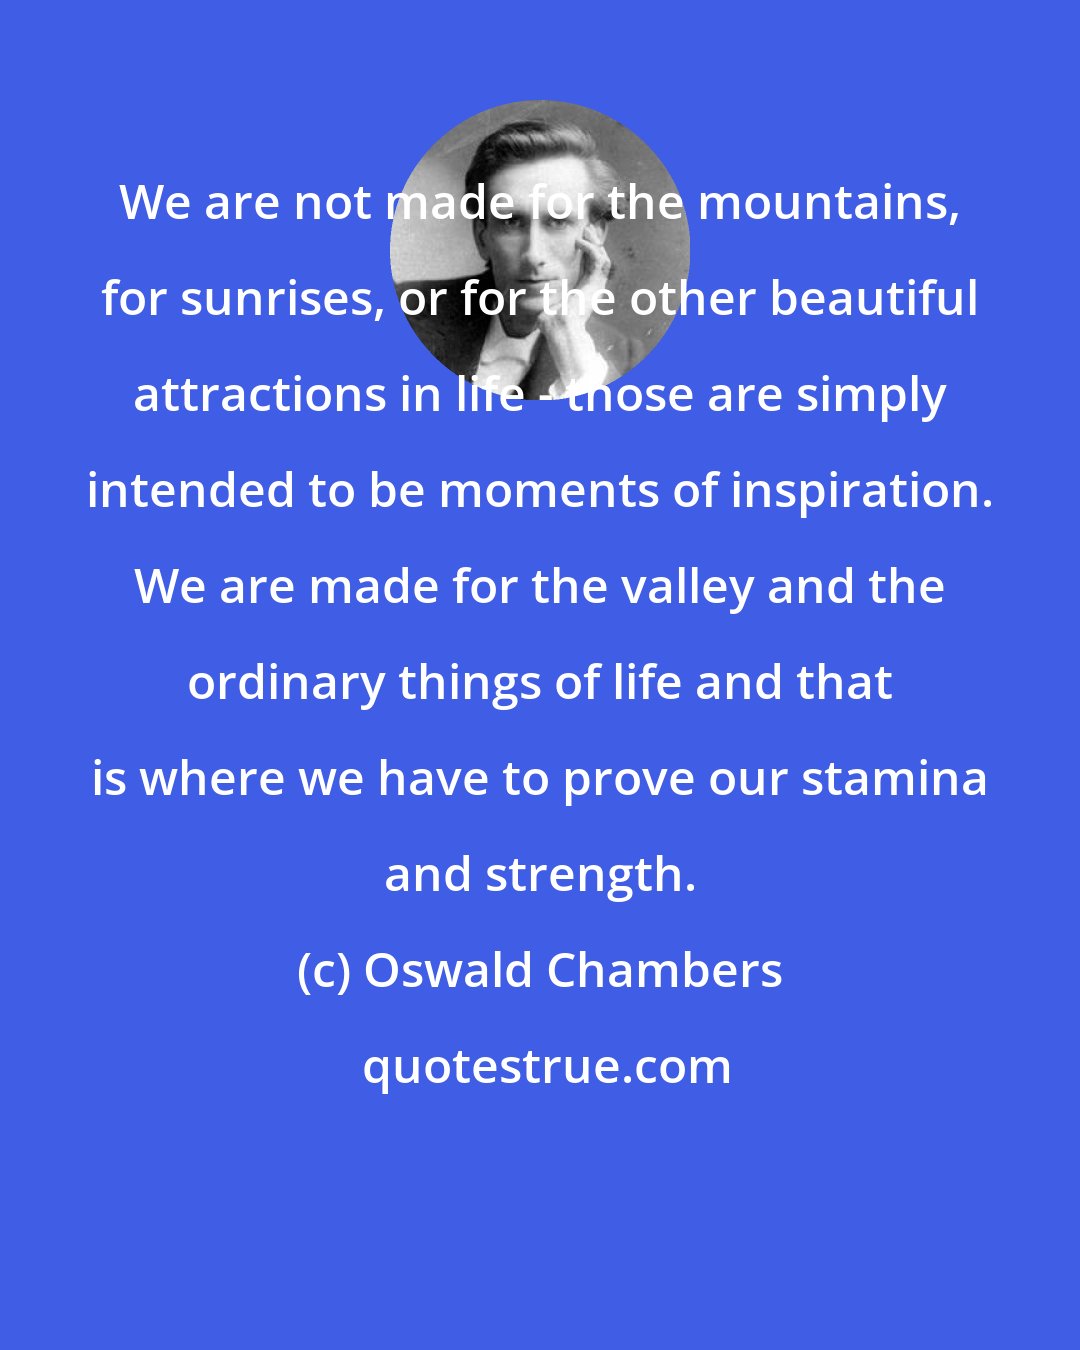 Oswald Chambers: We are not made for the mountains, for sunrises, or for the other beautiful attractions in life - those are simply intended to be moments of inspiration. We are made for the valley and the ordinary things of life and that is where we have to prove our stamina and strength.